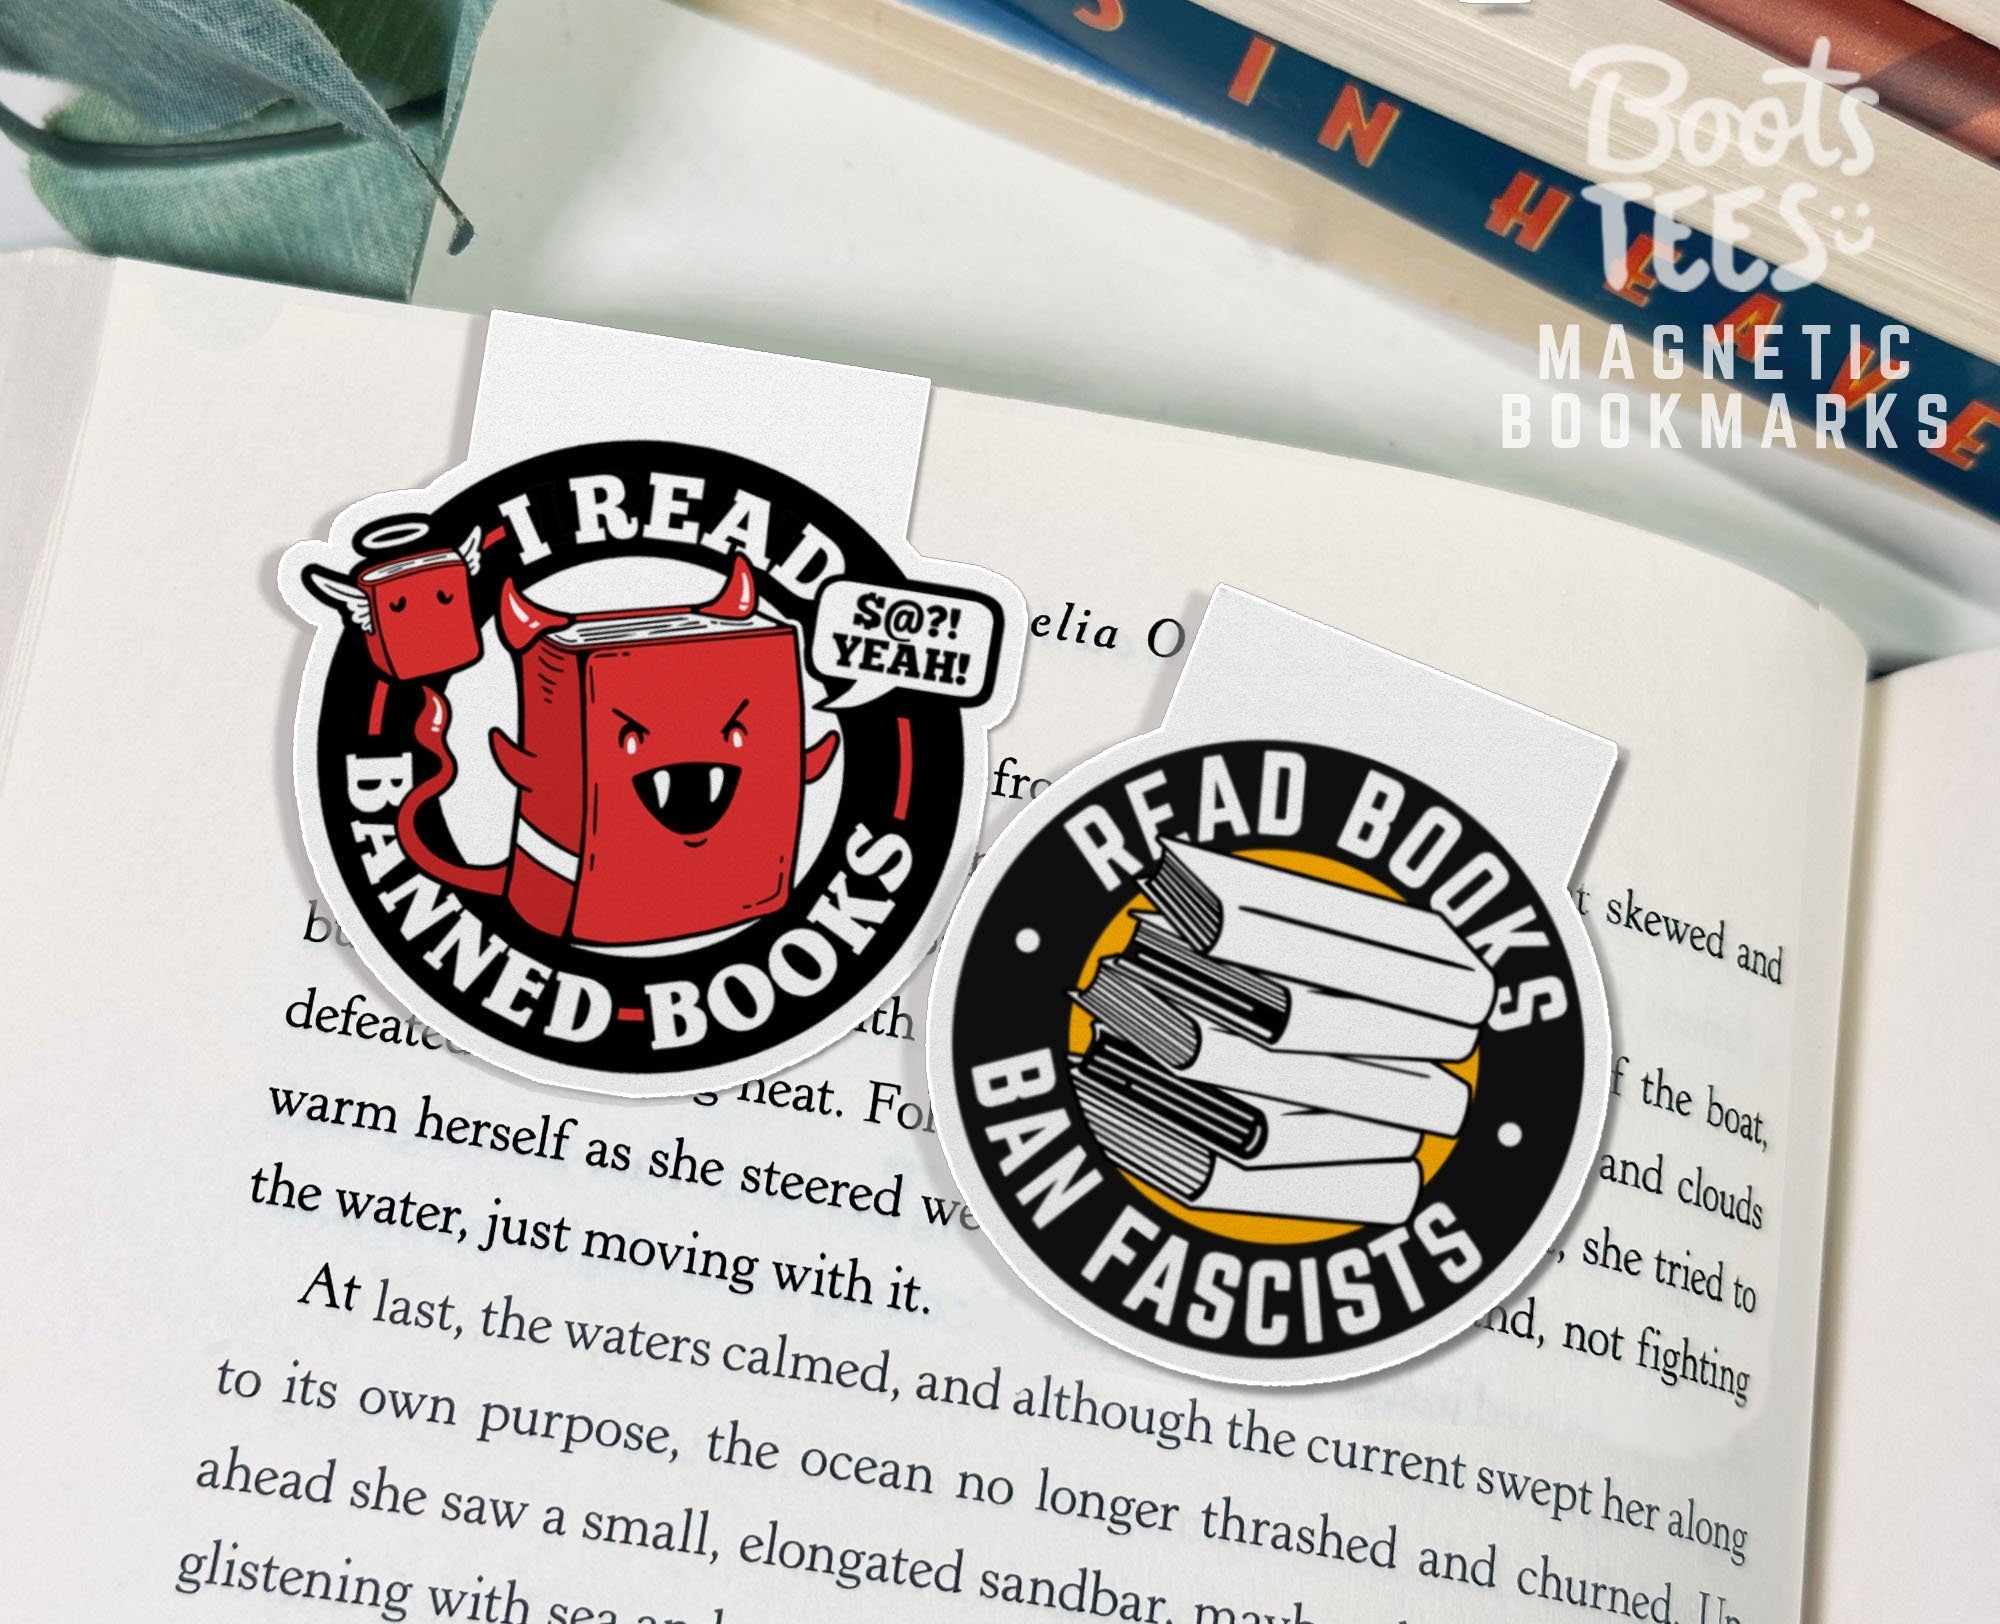 Banned Books Magnetic Bookmark Set by BootsTees